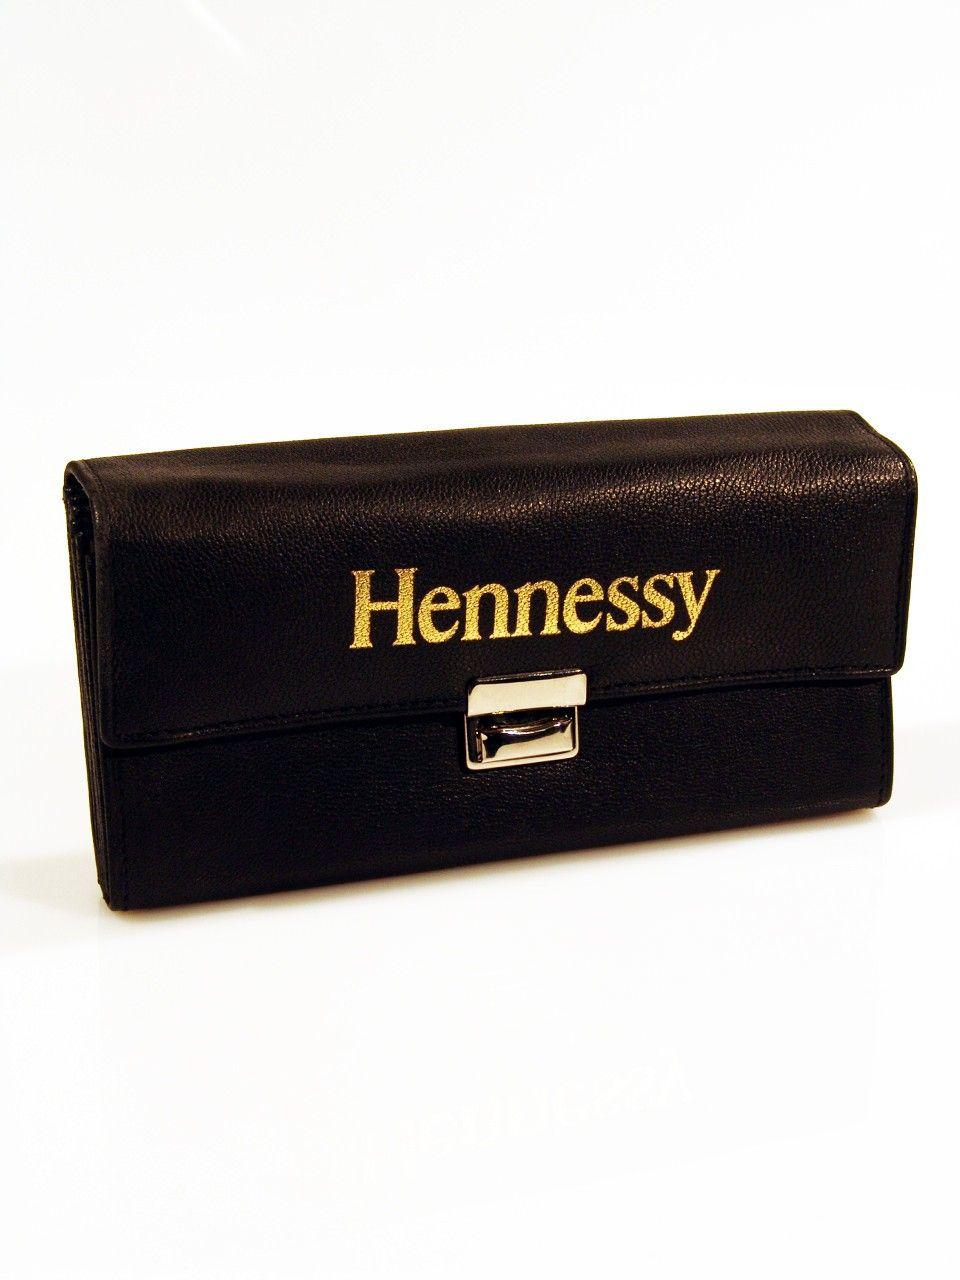 Hennessy Taxi Logo - Hennessy wallet | Waiter wallet Hennessy | Hennessy waiter wallet ...